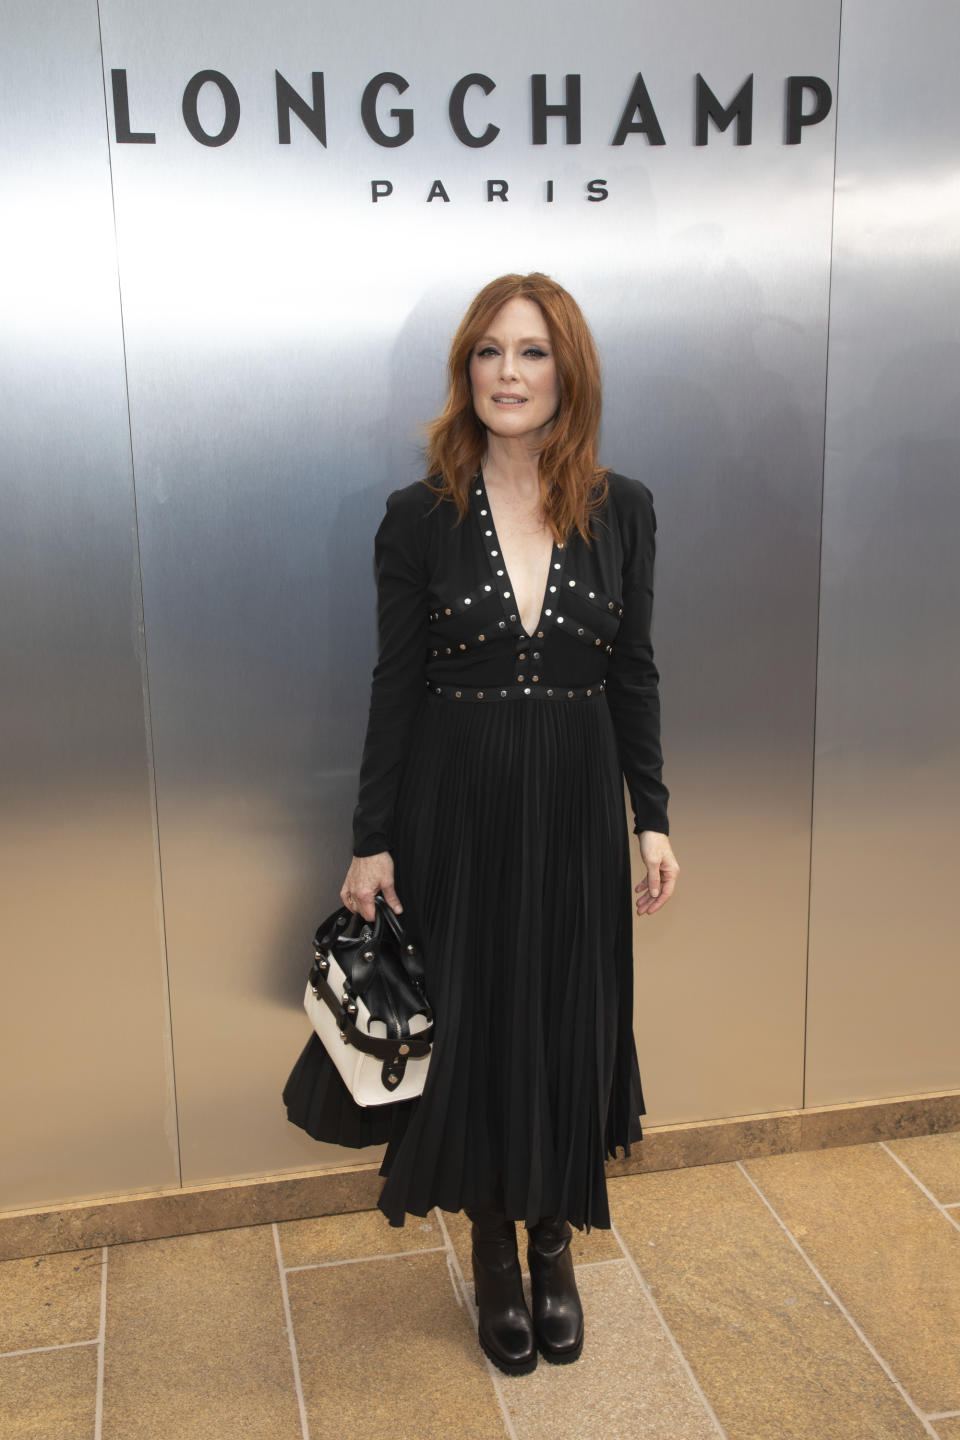 Actress Julianne Moore attends the Longchamp runway show at Lincoln Center during NYFW Spring/Summer 2020 on Saturday, Sept. 7, 2019, in New York. (Photo by Brent N. Clarke/Invision/AP